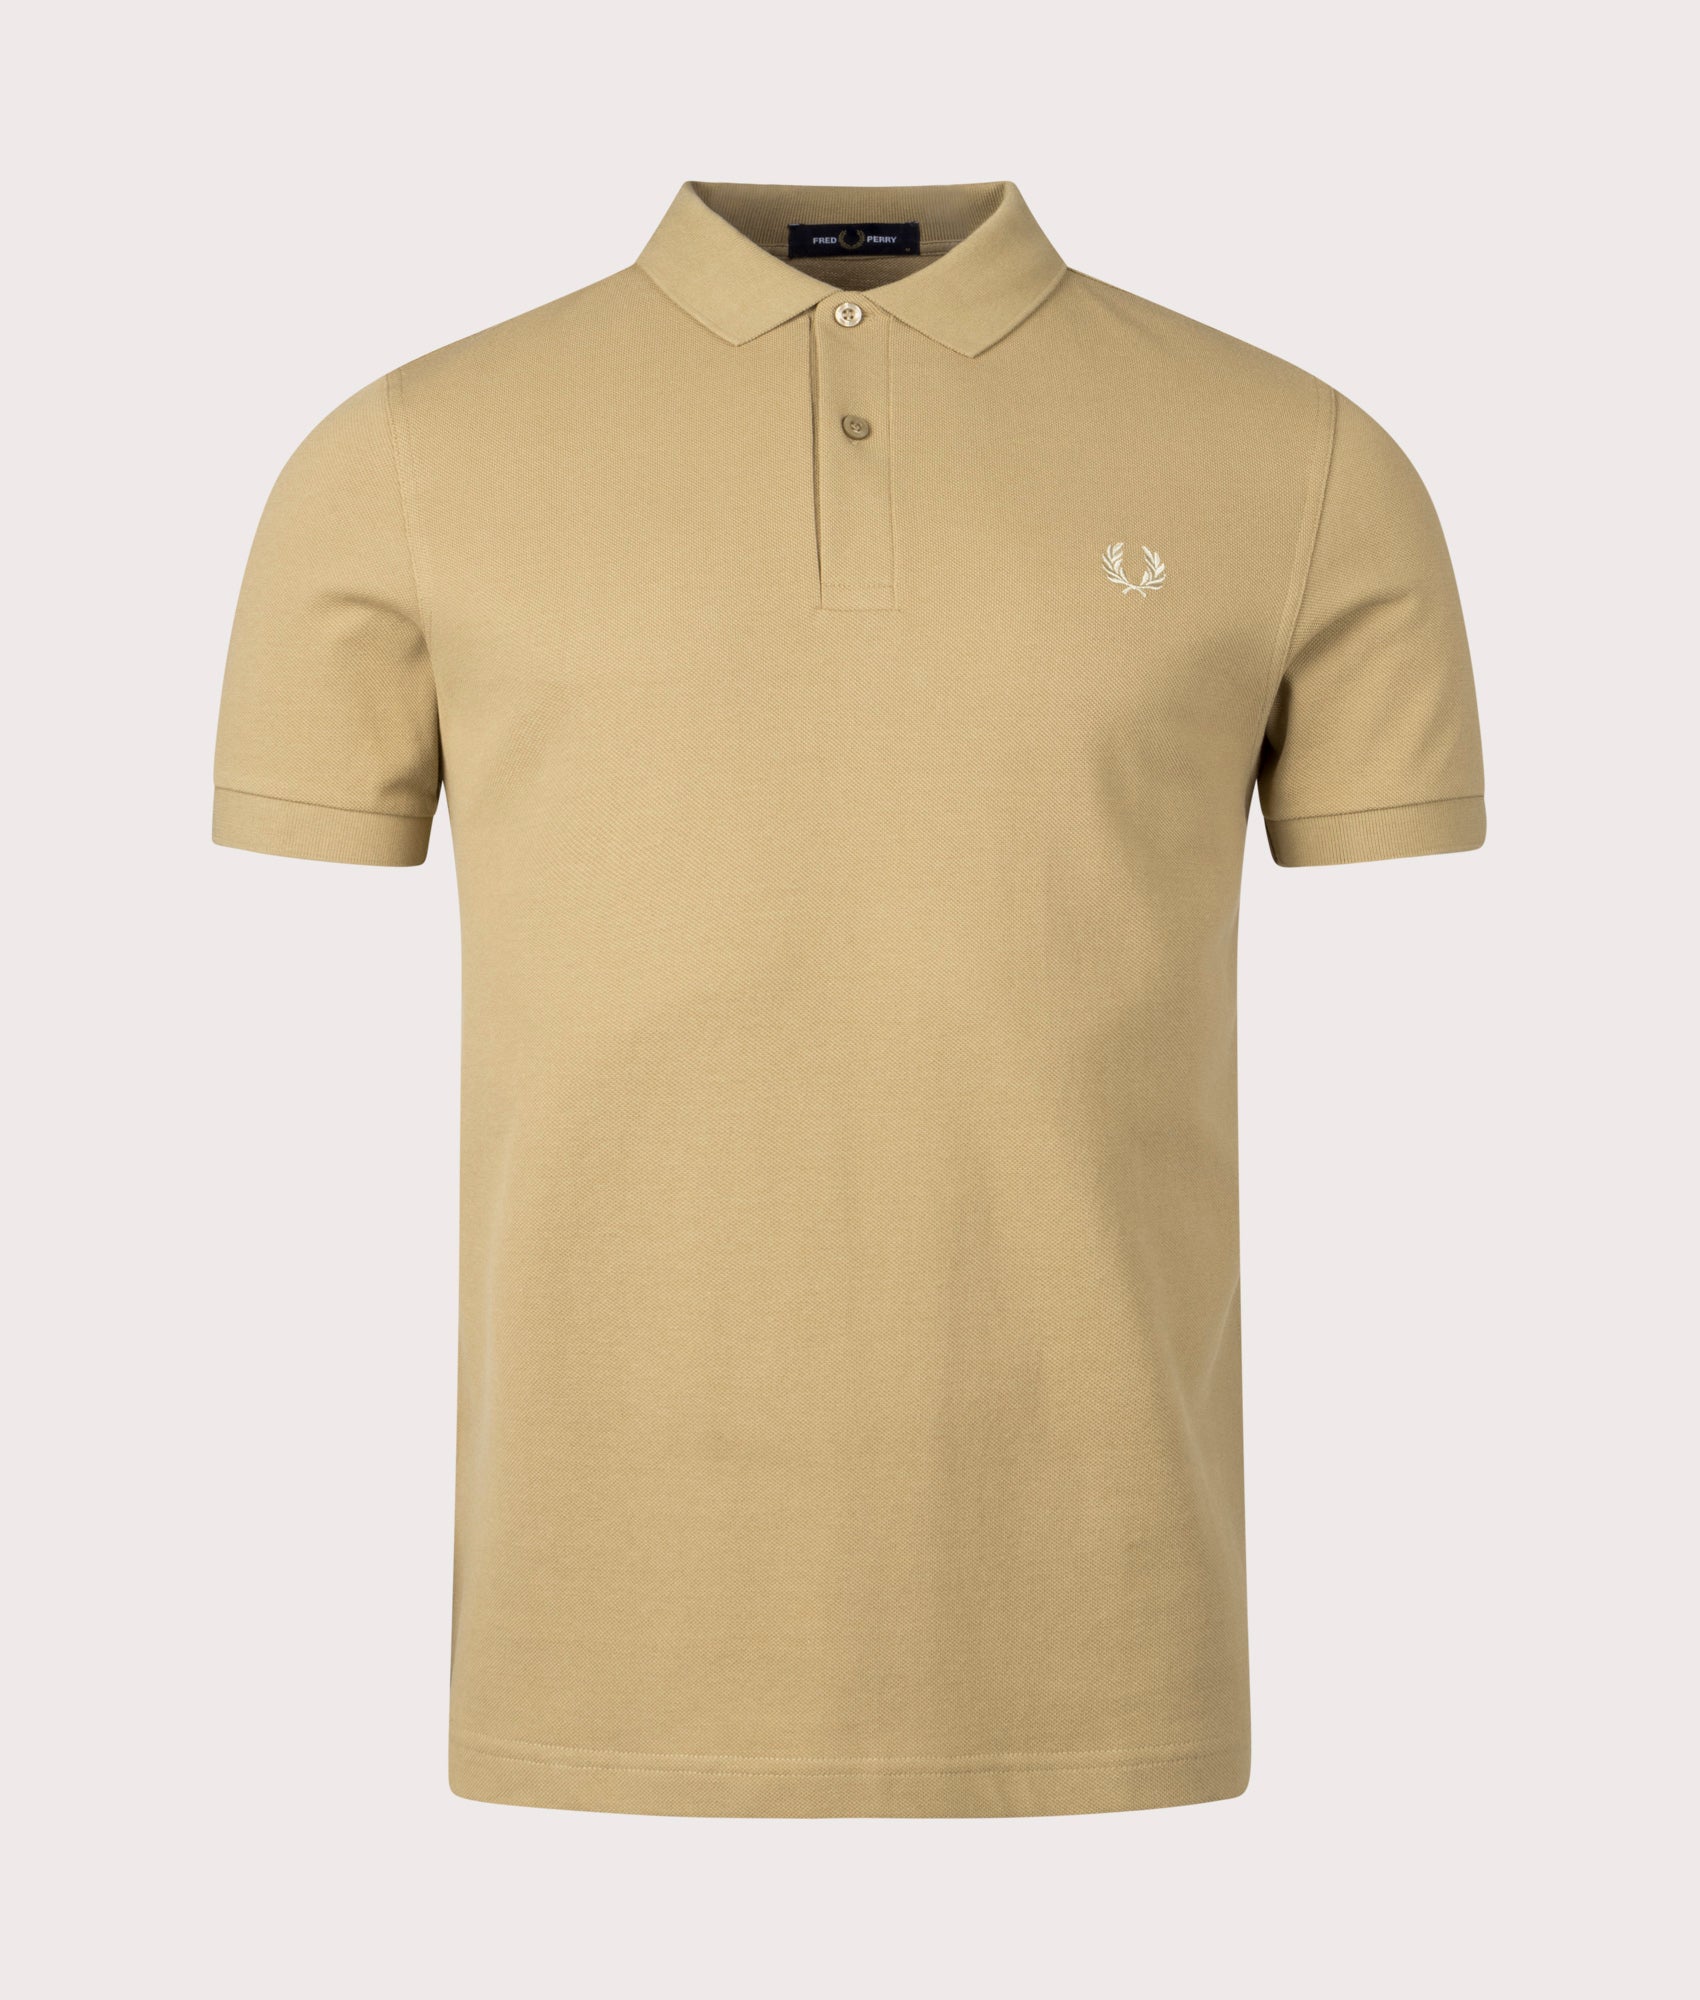 Fred Perry Mens Plain Fred Perry Polo Shirt - Colour: V19 Warm Stone/Oatmeal - Size: Large